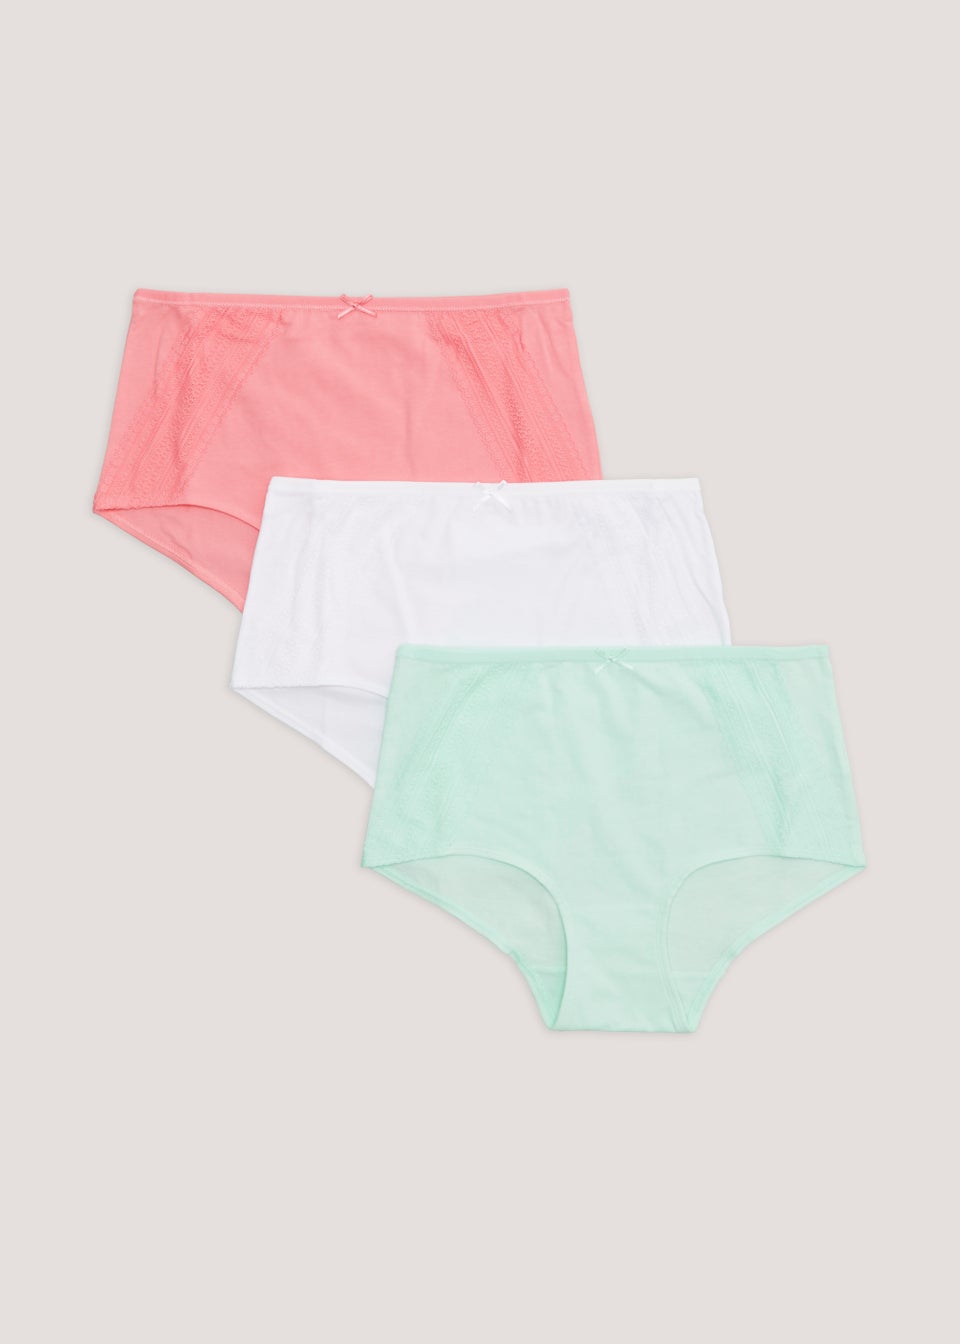 Leamel 3 Pack Full Brief Soft Knickers for Women Cotton Modal Underwear  Full Coverage Maxi Briefs Multipack Undies Panties UK Size 8 :  : Fashion